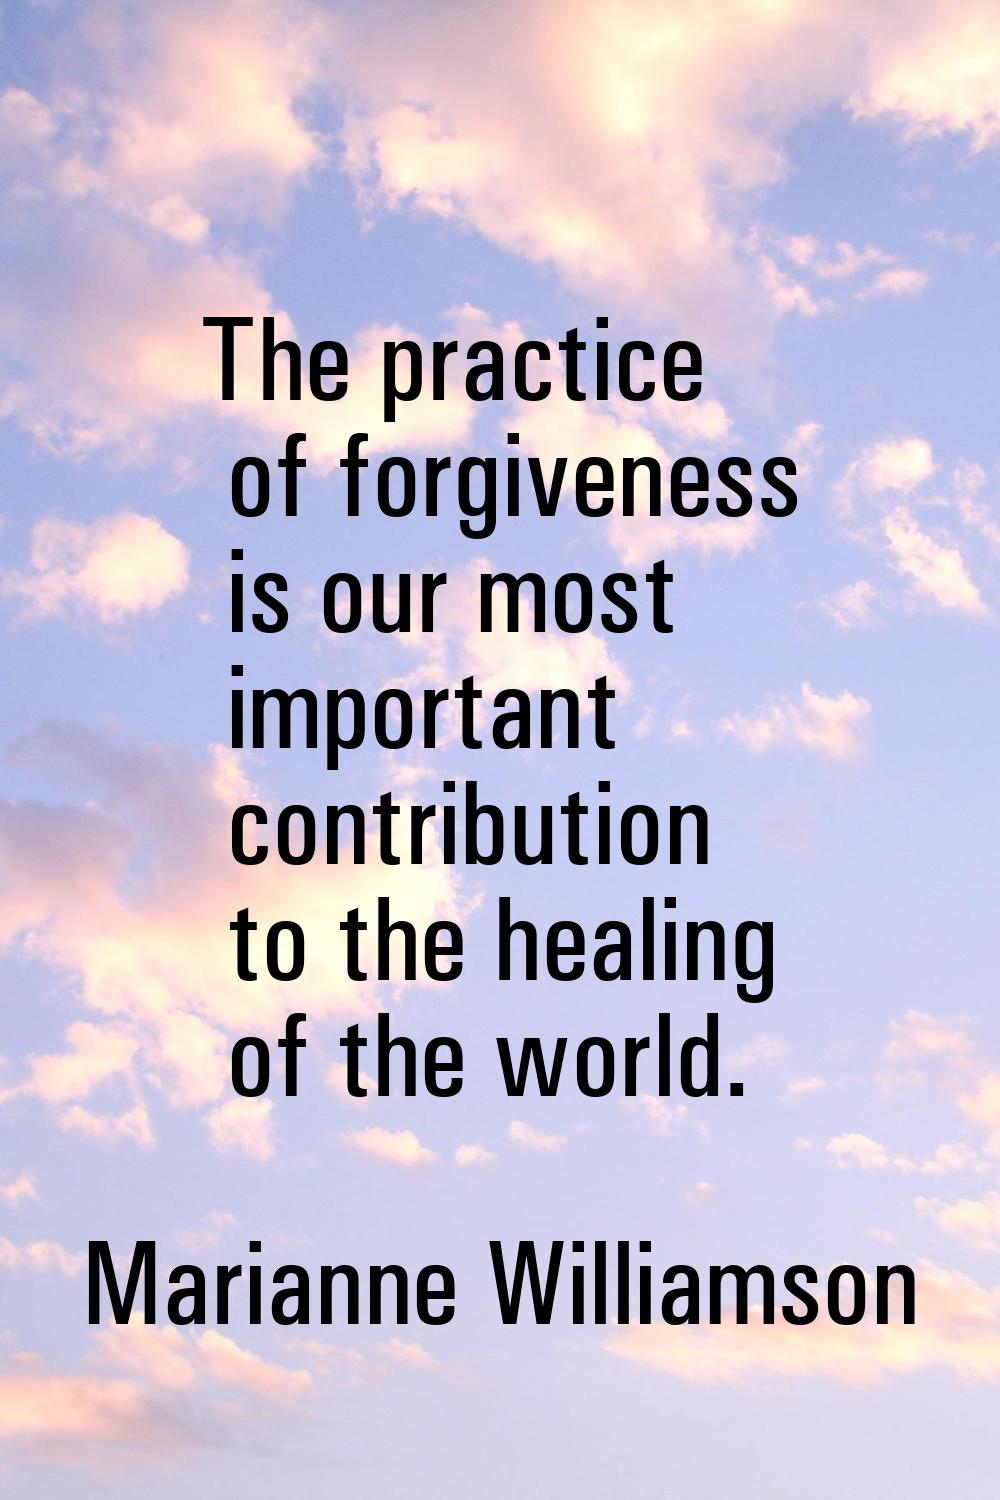 The practice of forgiveness is our most important contribution to the healing of the world.